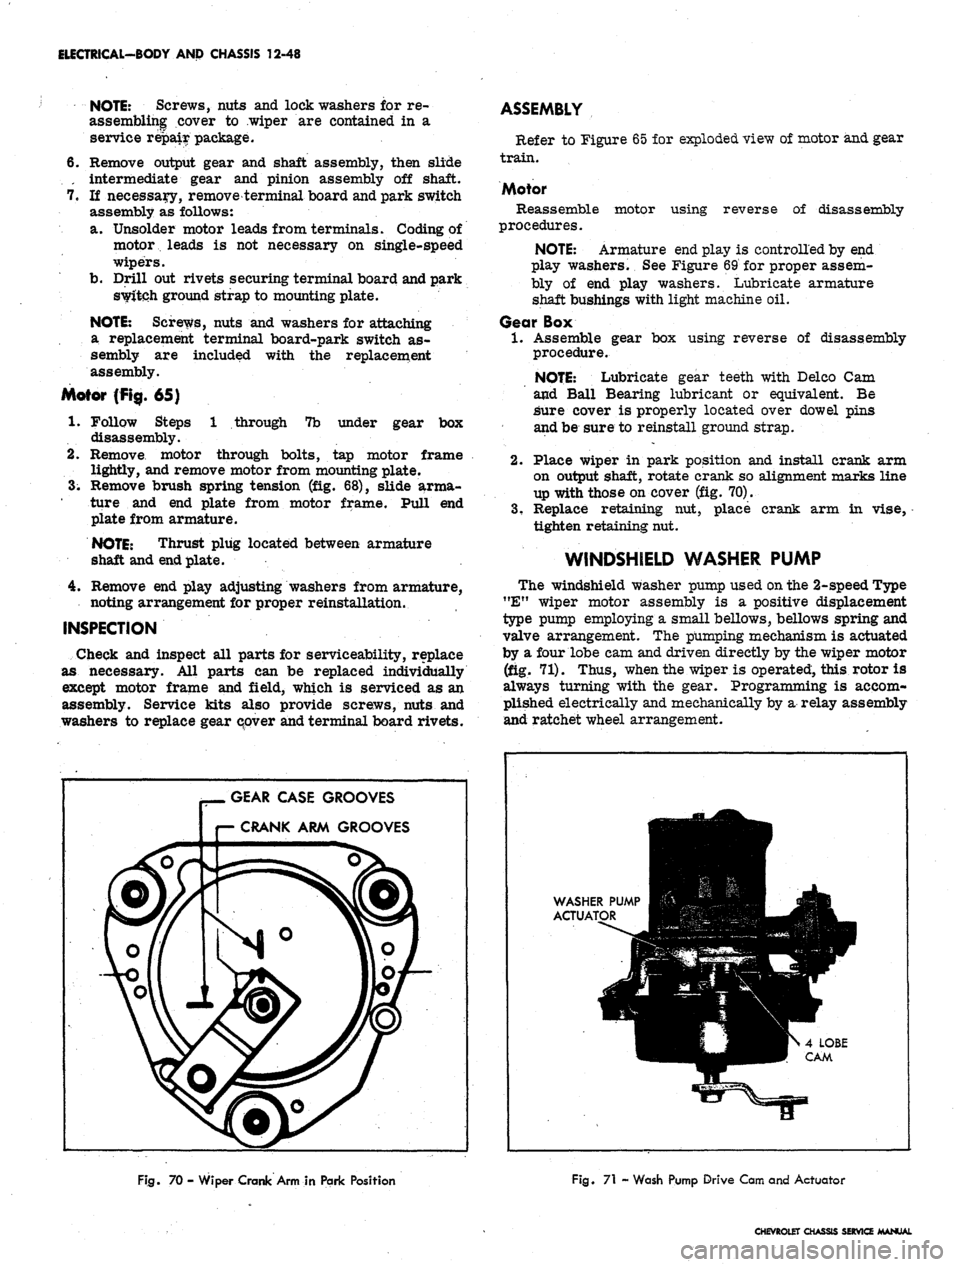 CHEVROLET CAMARO 1967 1.G Chassis Workshop Manual 
ELECTRICAL-BODY
 AND CHASSIS 12-48

NOTE:
 Screws, nuts and lock washers for re-

assembling cover to wiper are contained in a

service repair package.

6. Remove output gear and shaft assembly, then